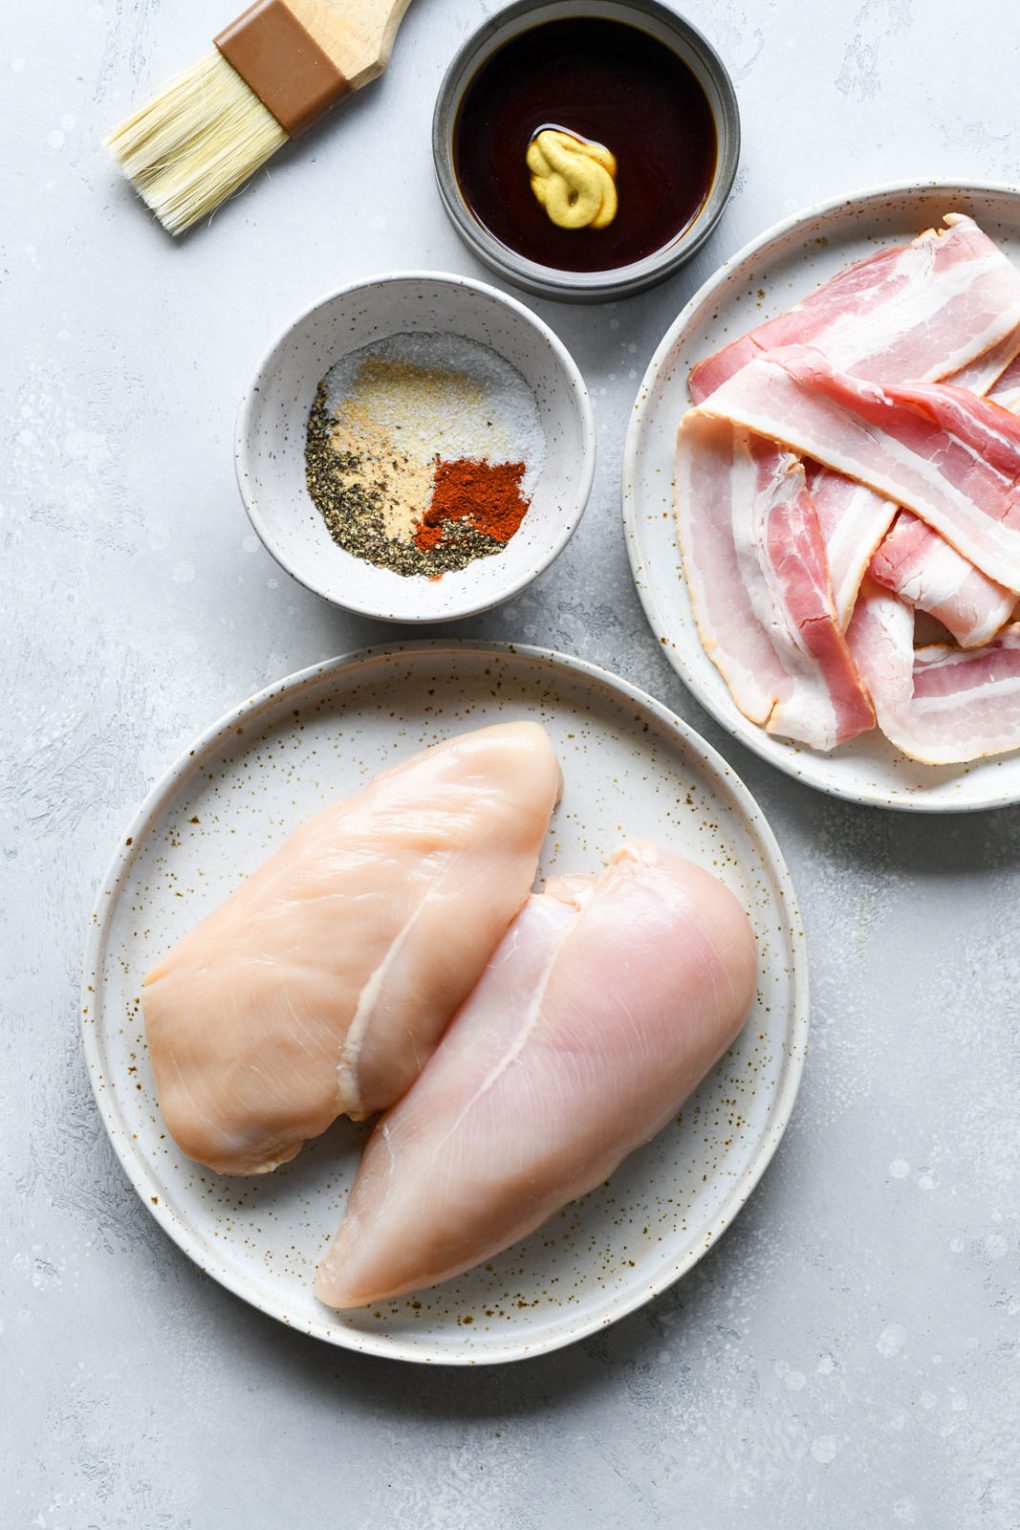 An image of the ingredients for whole30 bacon wrapped chicken. Two large chicken breasts on a white speckled plate, a small pile of bacon, spices in a little white bowl, and a tiny dish with coconut aminos and dijon mustard. On a light colored background.